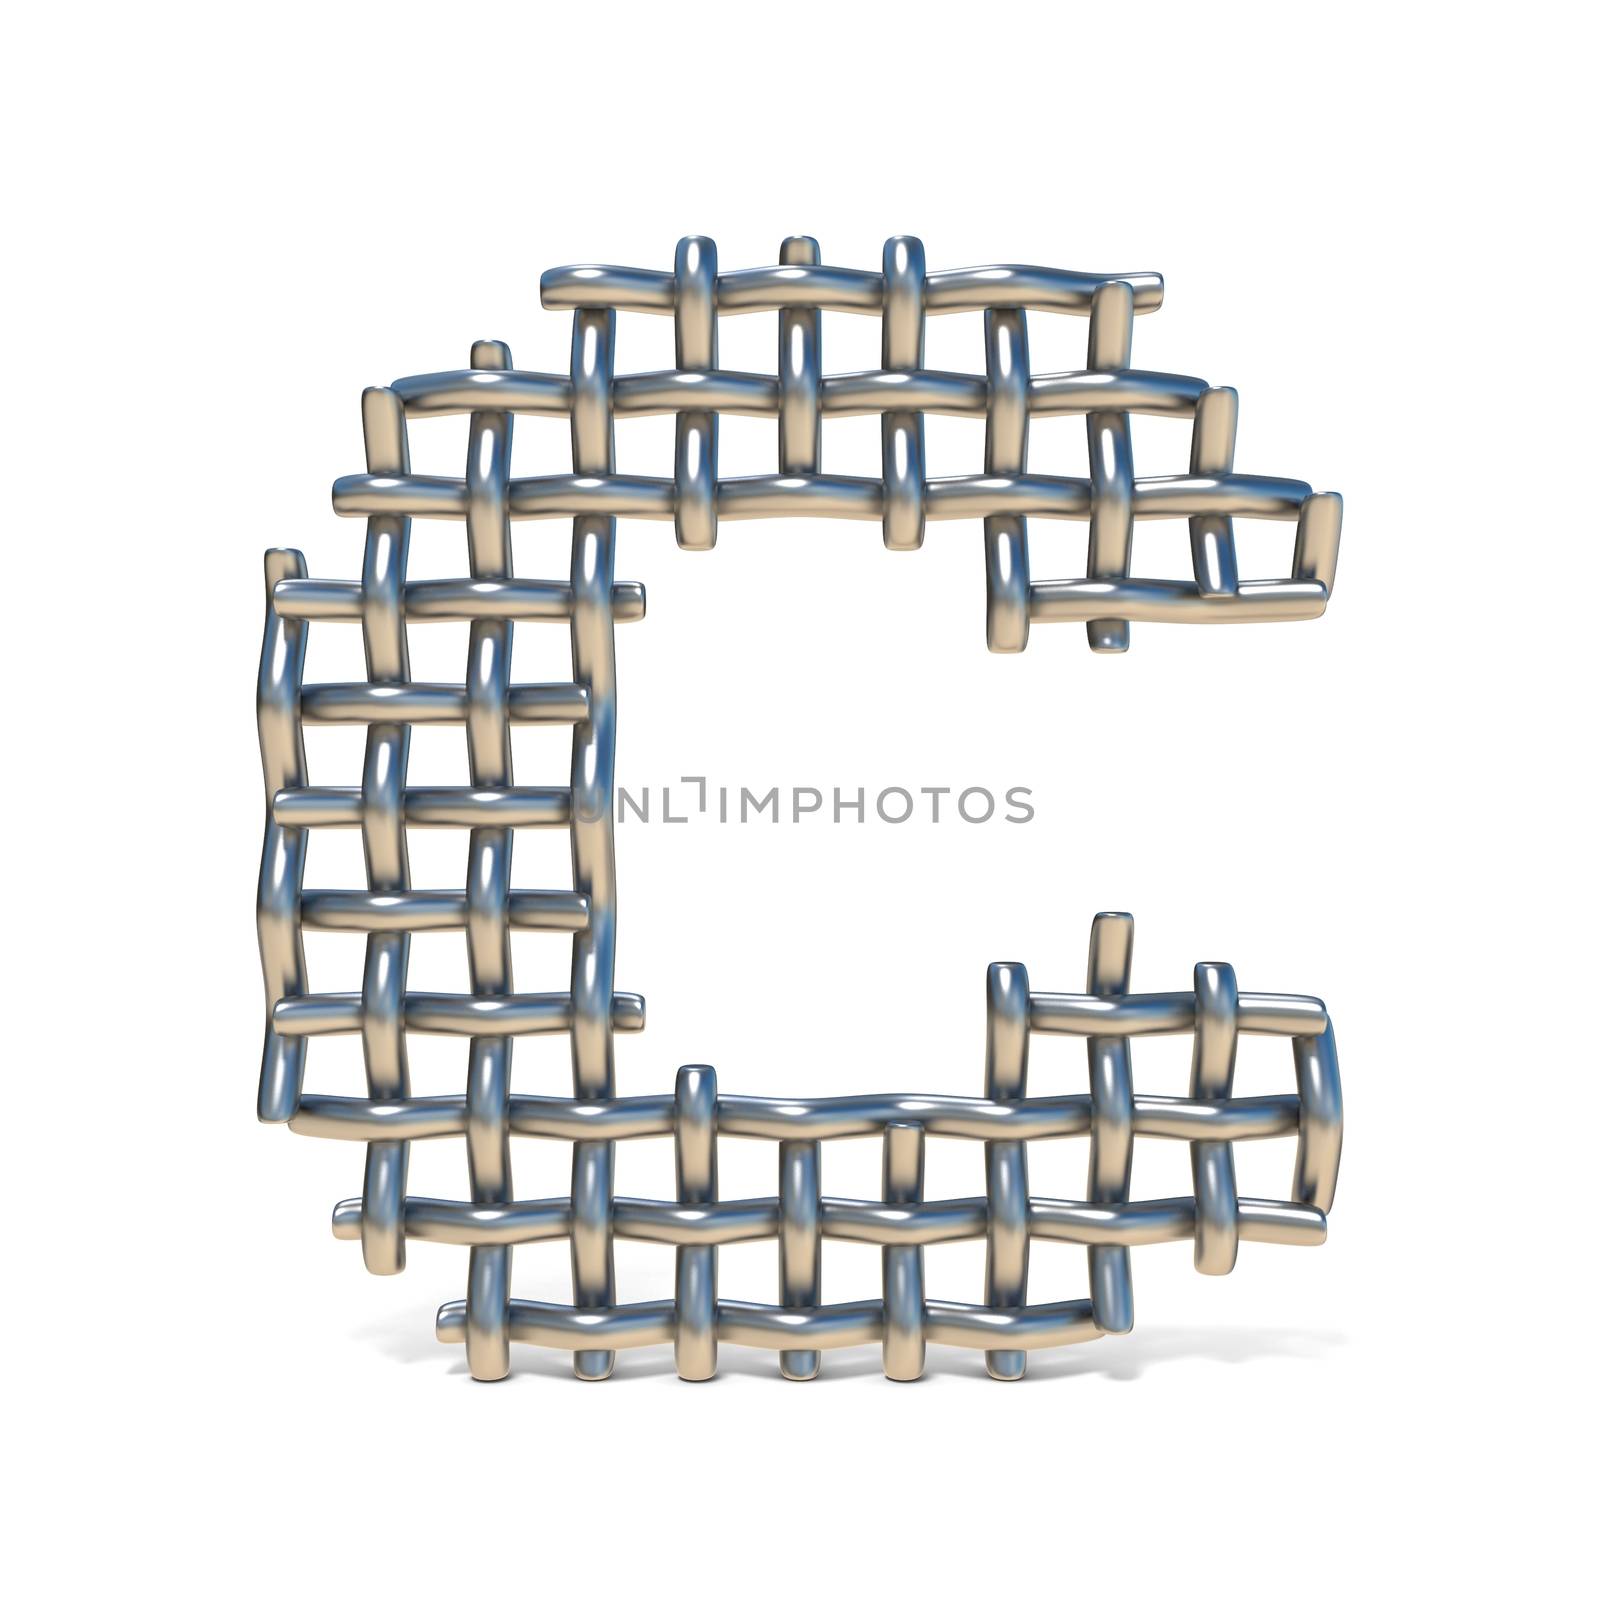 Metal wire mesh font LETTER C 3D render illustration isolated on white background